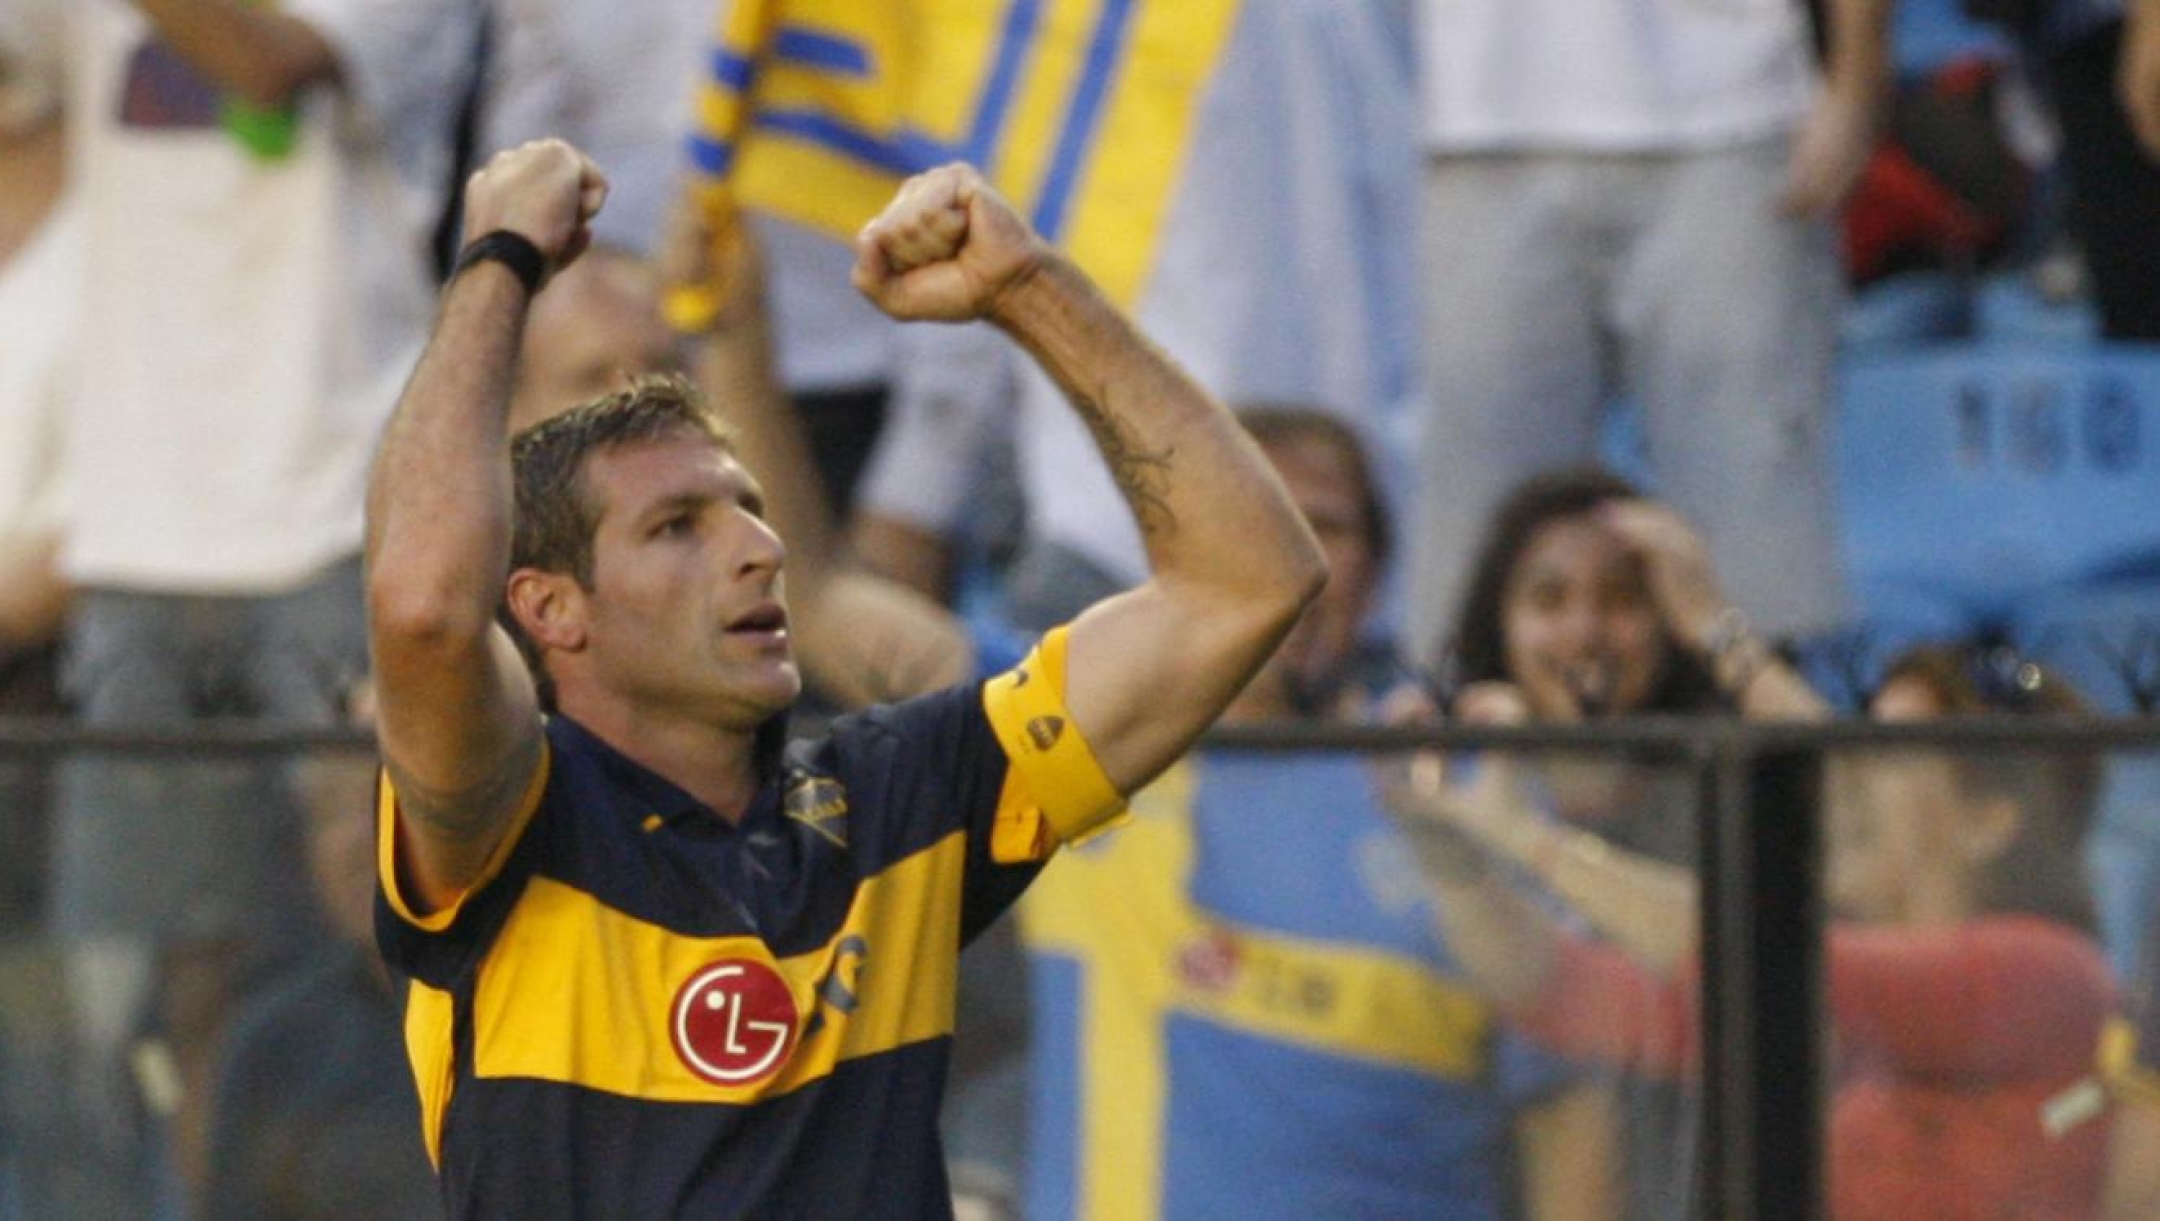 martin palermo - Boca Juniors' Martin Palermo reacts after scoring his team's first goal against Arsenal during an Argentine soccer league match in Buenos Aires, Monday, April 12, 2010. (AP Photo/ Eduardo Di Baia)